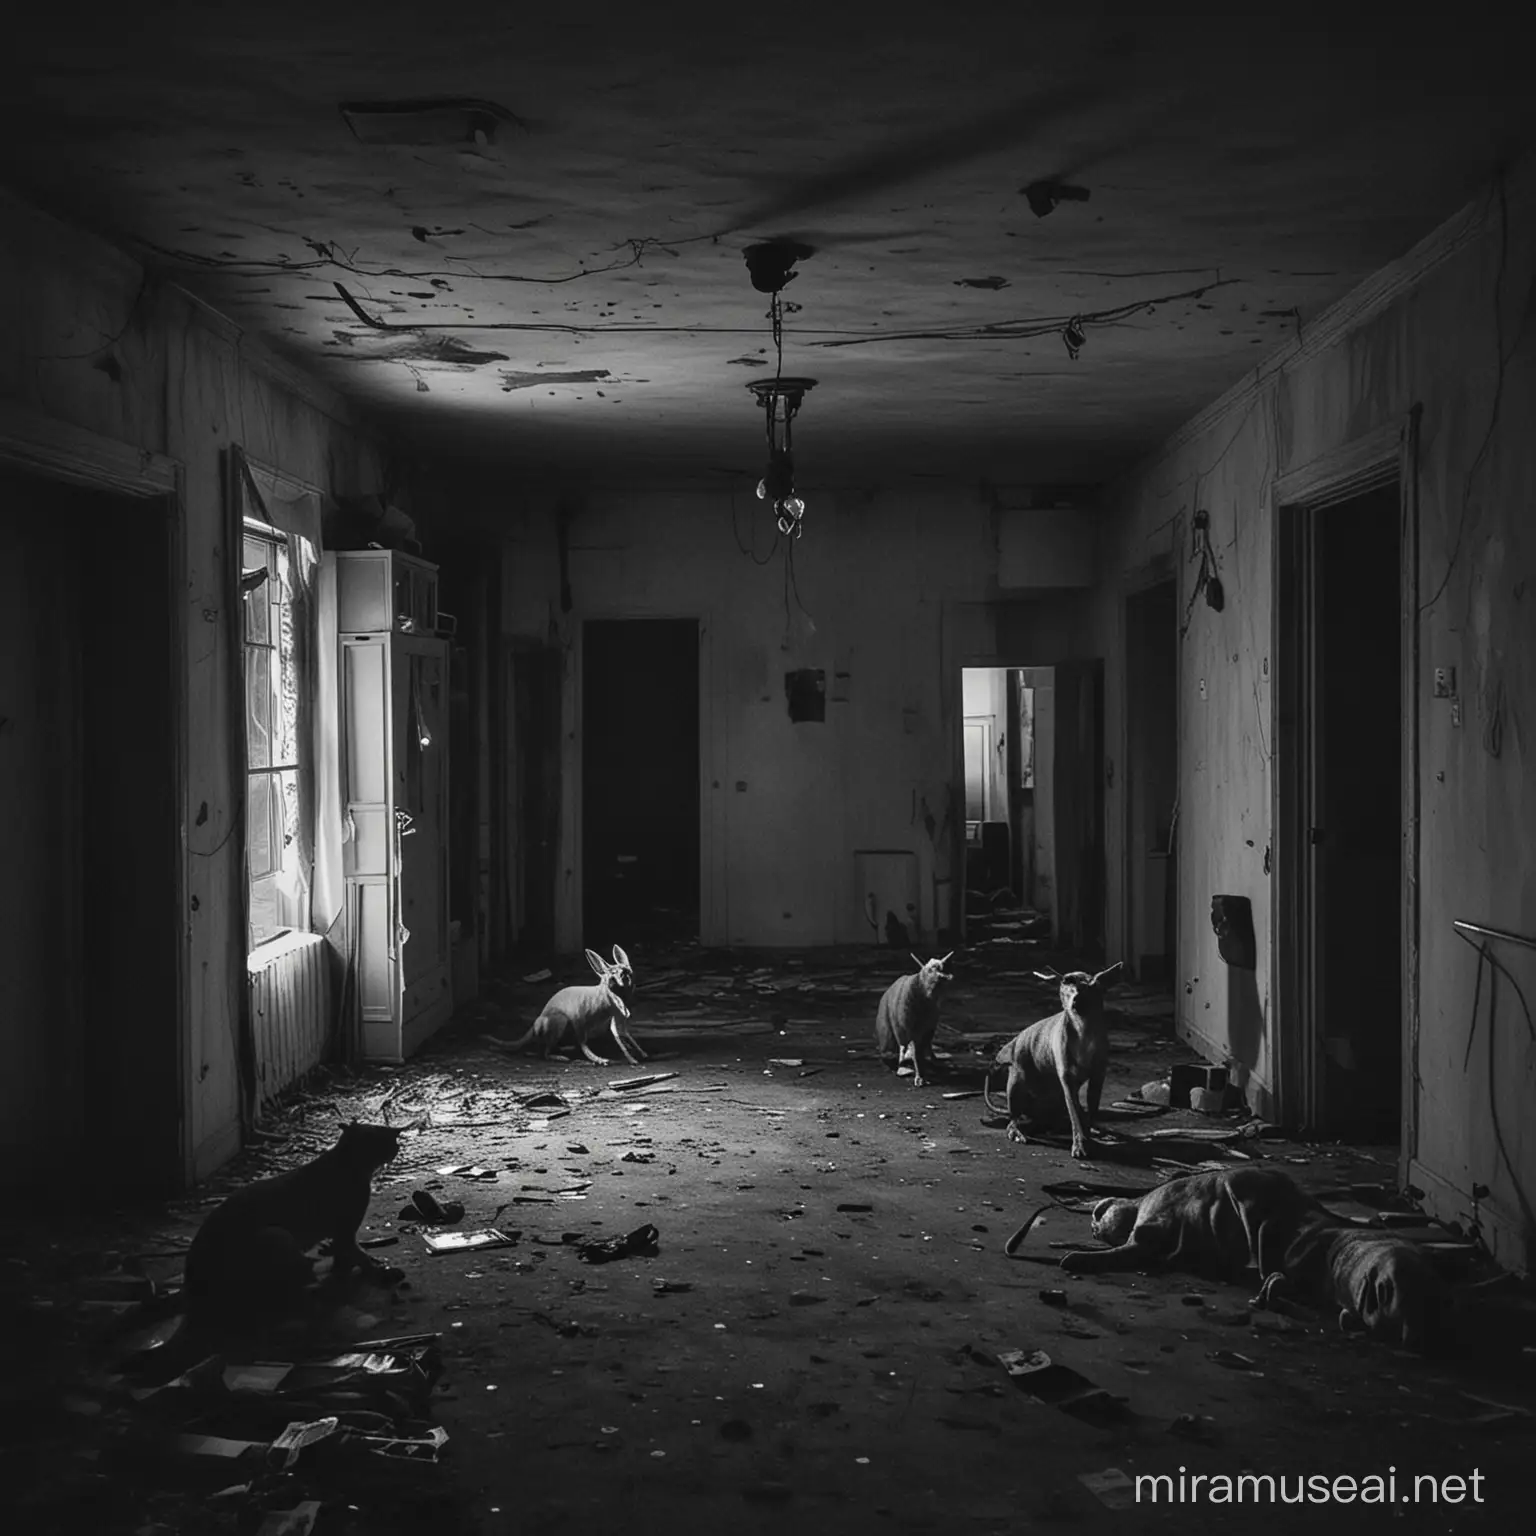 Abandoned apartment with creature lights, the environment is very VERY dark, and you cannot see the creatures, only their light eyes